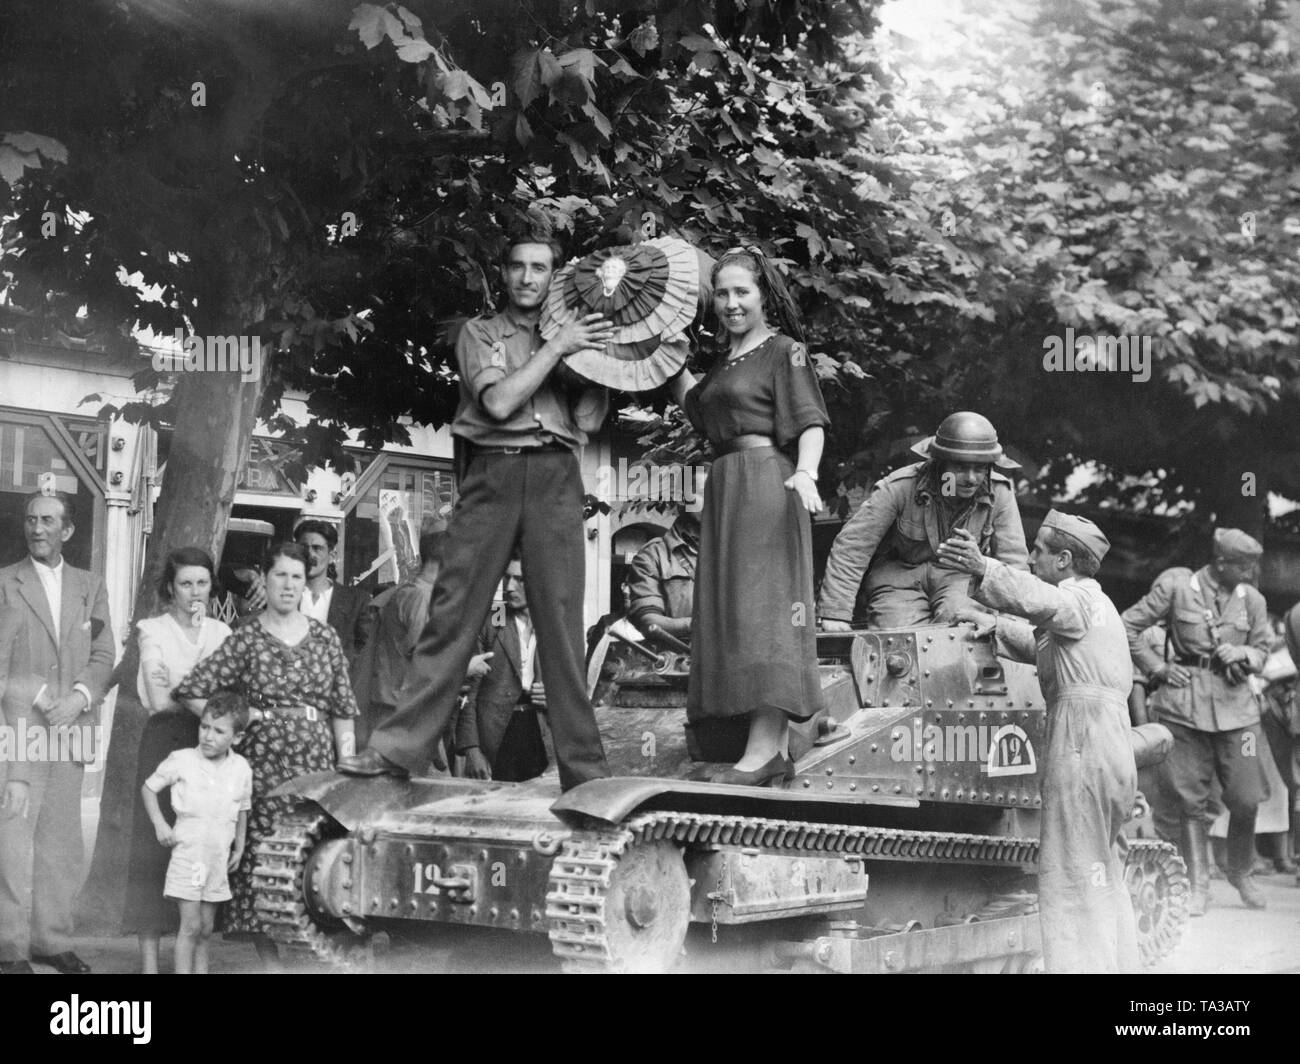 Photo of an Italian armored car (L3 / 33, Carro veloce 33) in the streets of Santander on August 27, 1937. A man and a woman are standing on the tank with a rosette decorated with national colors. Behind, a tank commander of the Italian Corpo Truppe Volontarie (CTV) leans out of his vehicle. In the background on the right, a German officer of the Condor Legion. Stock Photo